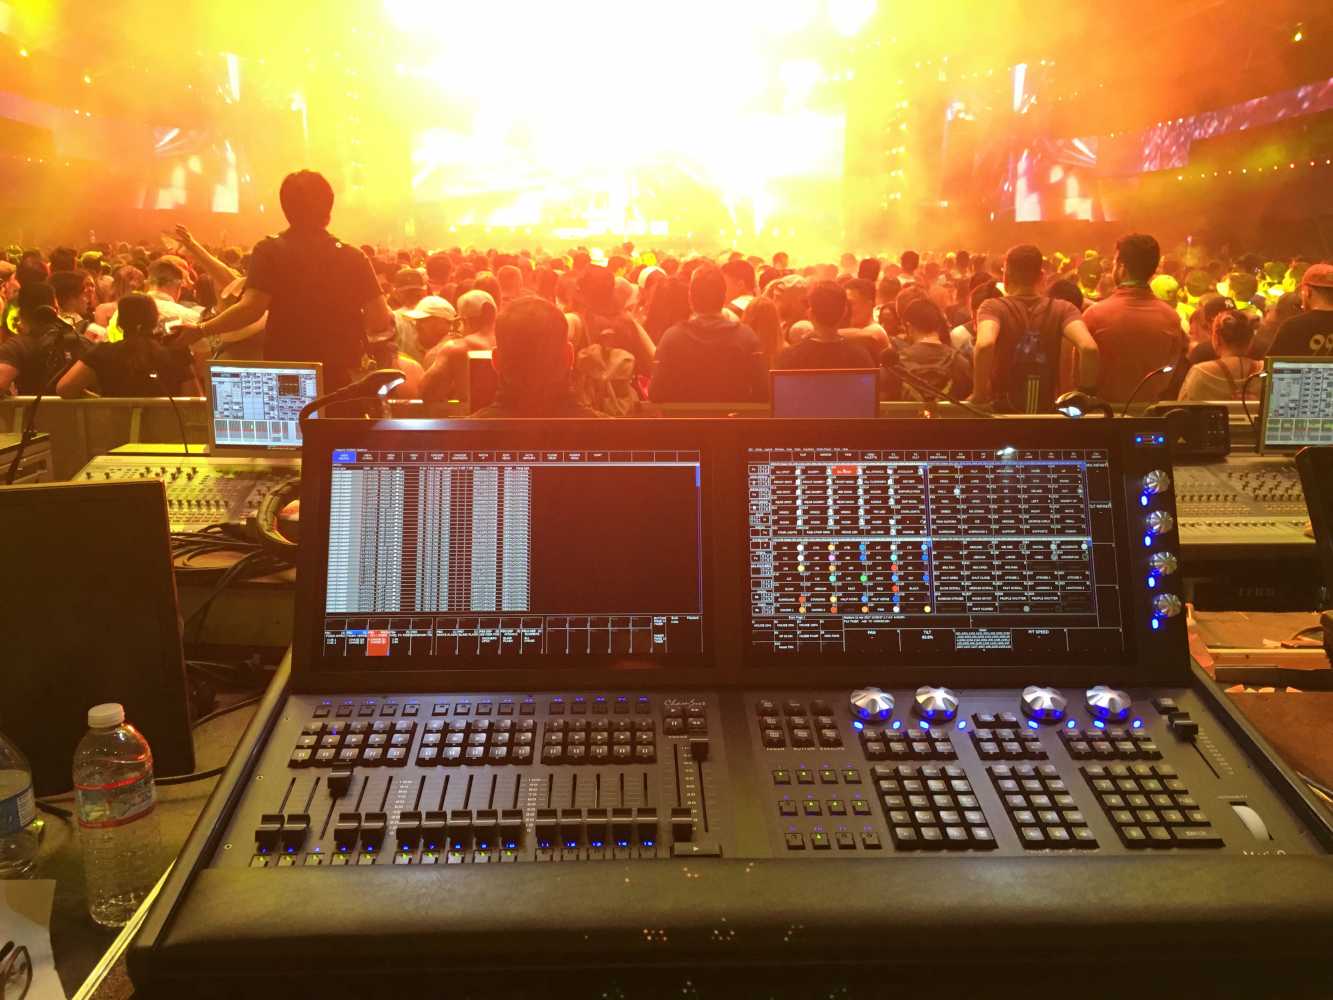 Dave Taylor programmed and controlled the set with the ChamSys MagicQ MQ500 Stadium